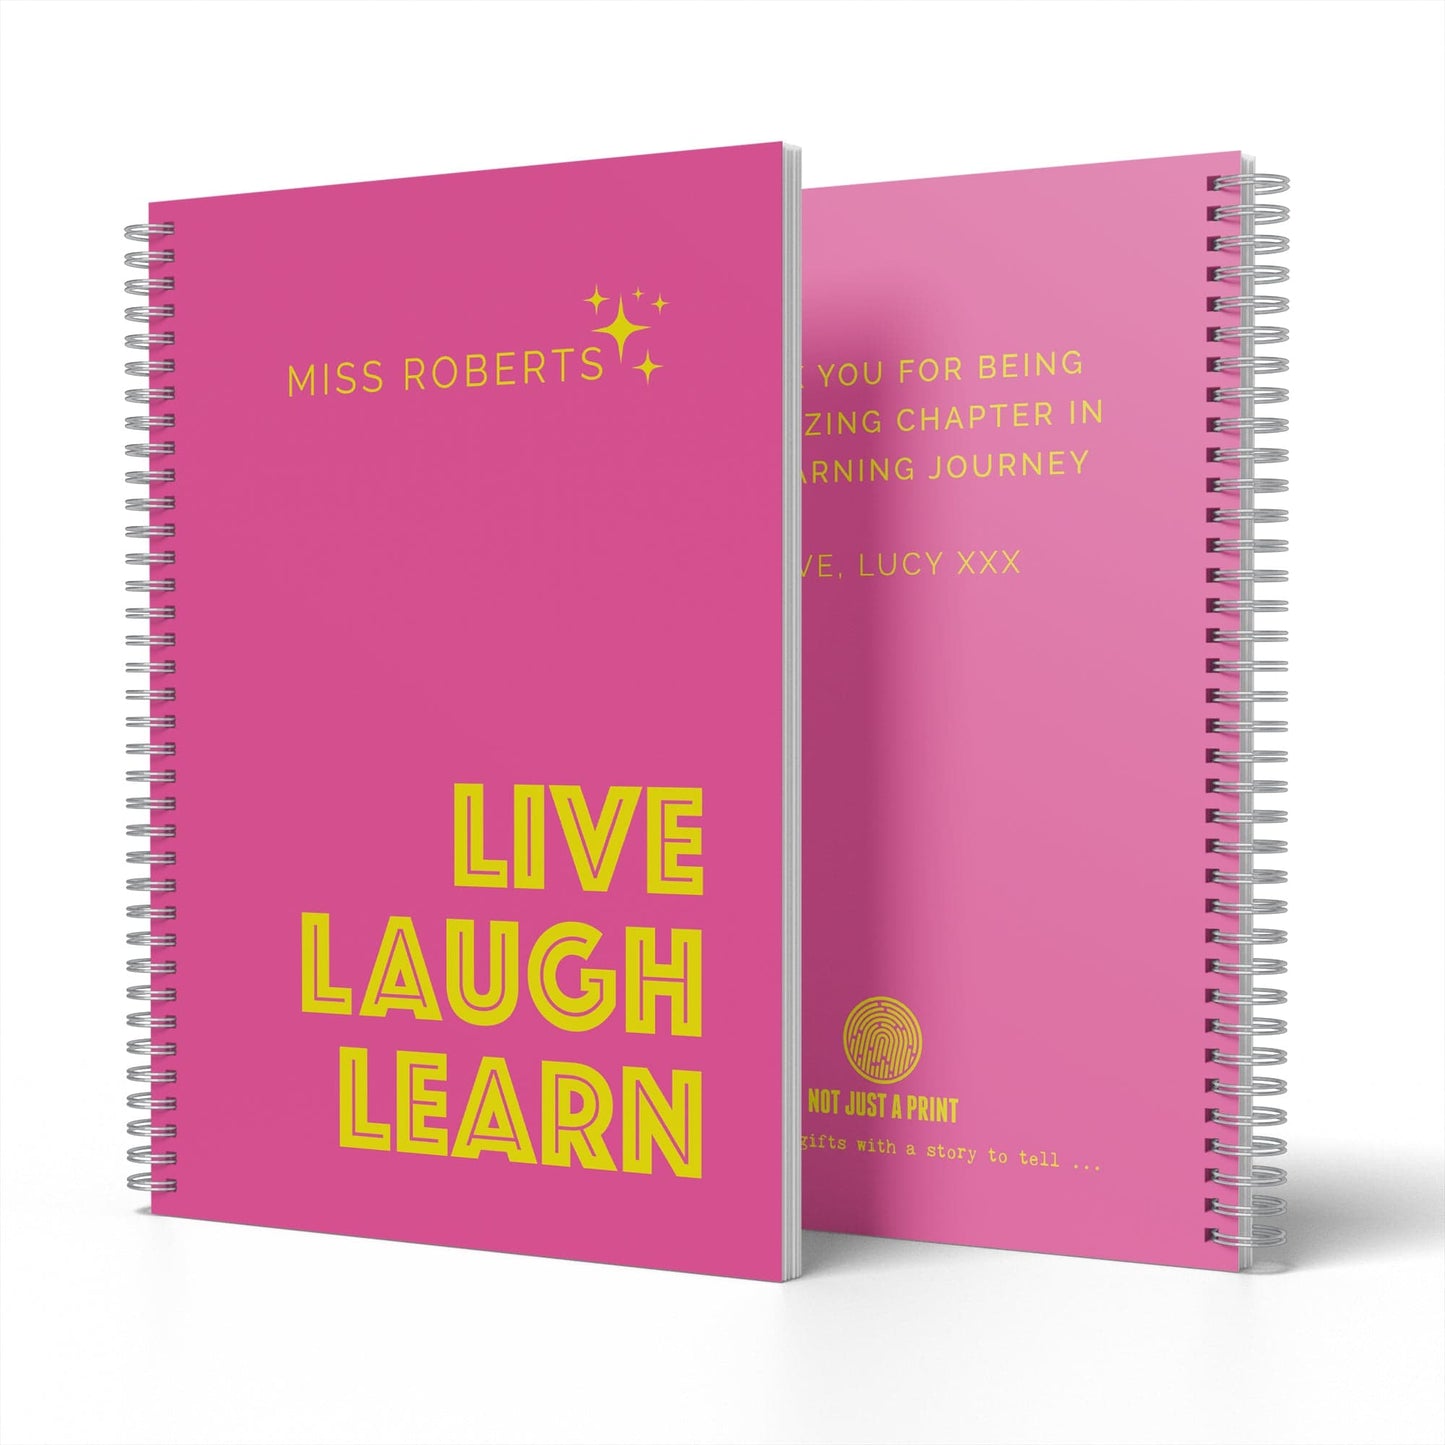 Personalised Gift for Teacher | Live Laugh Learn A5 Pink Spiral Bound Notebook